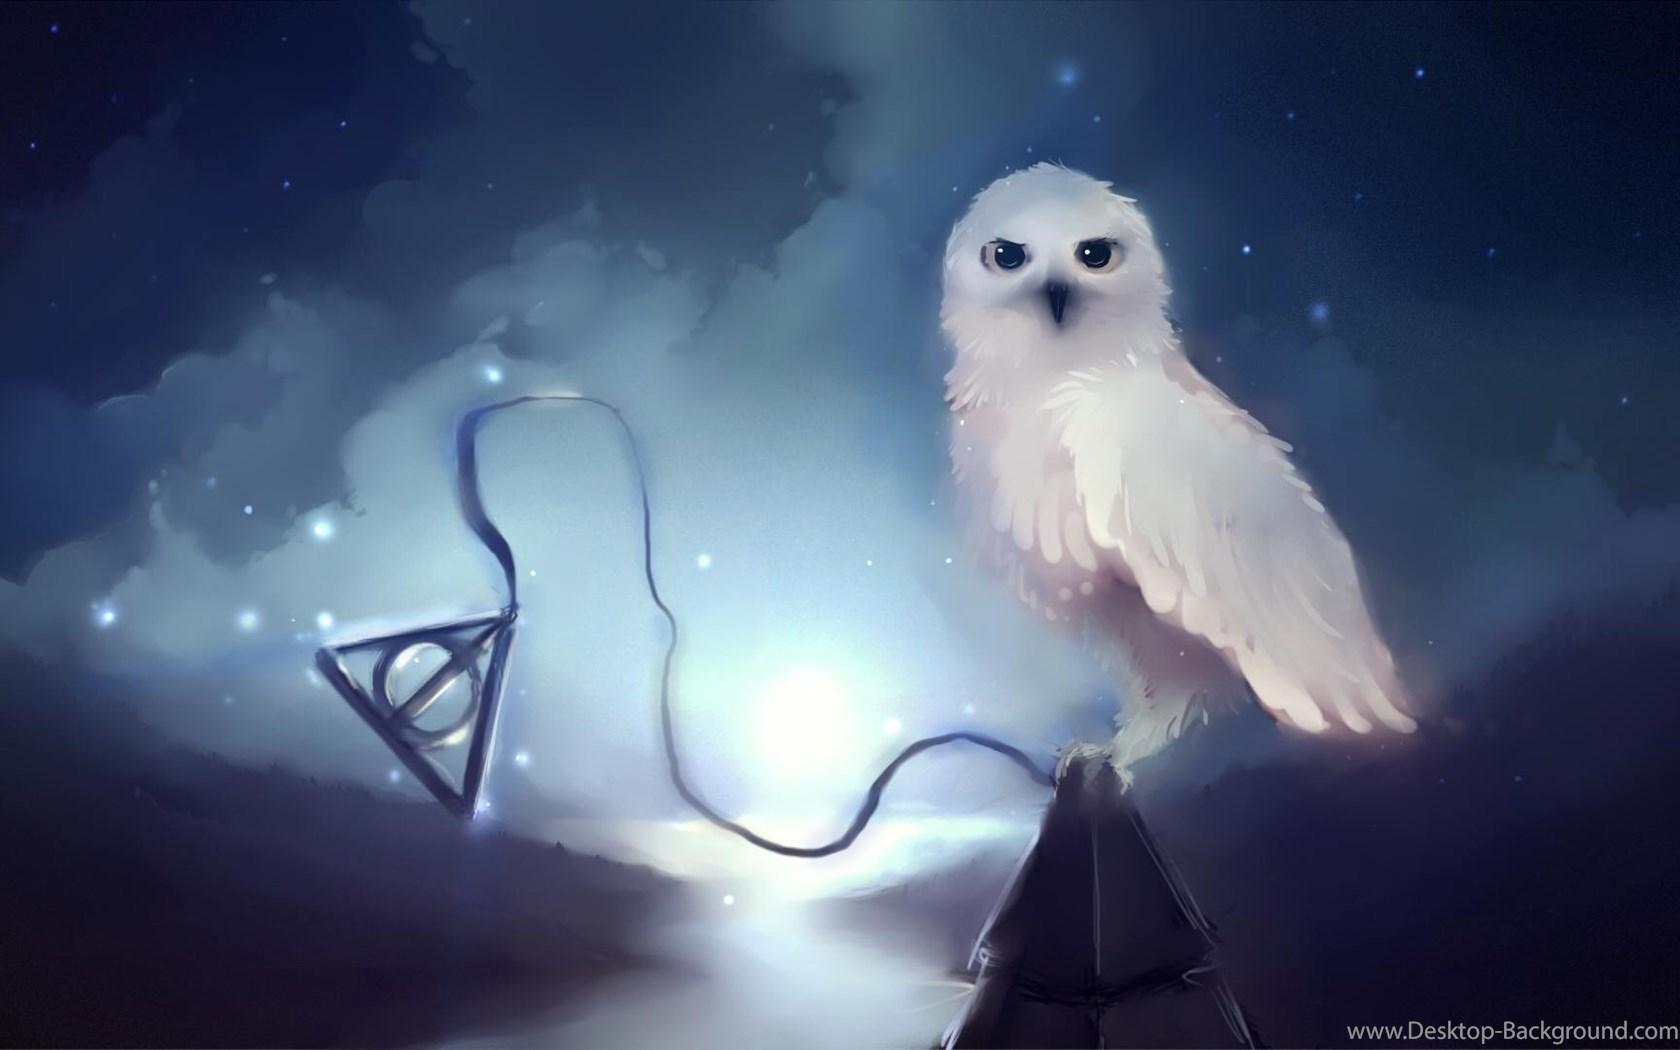 HEDWIG AND THE DEATHLY HALLOWS NECKLACE WALLPAPER Desktop Background